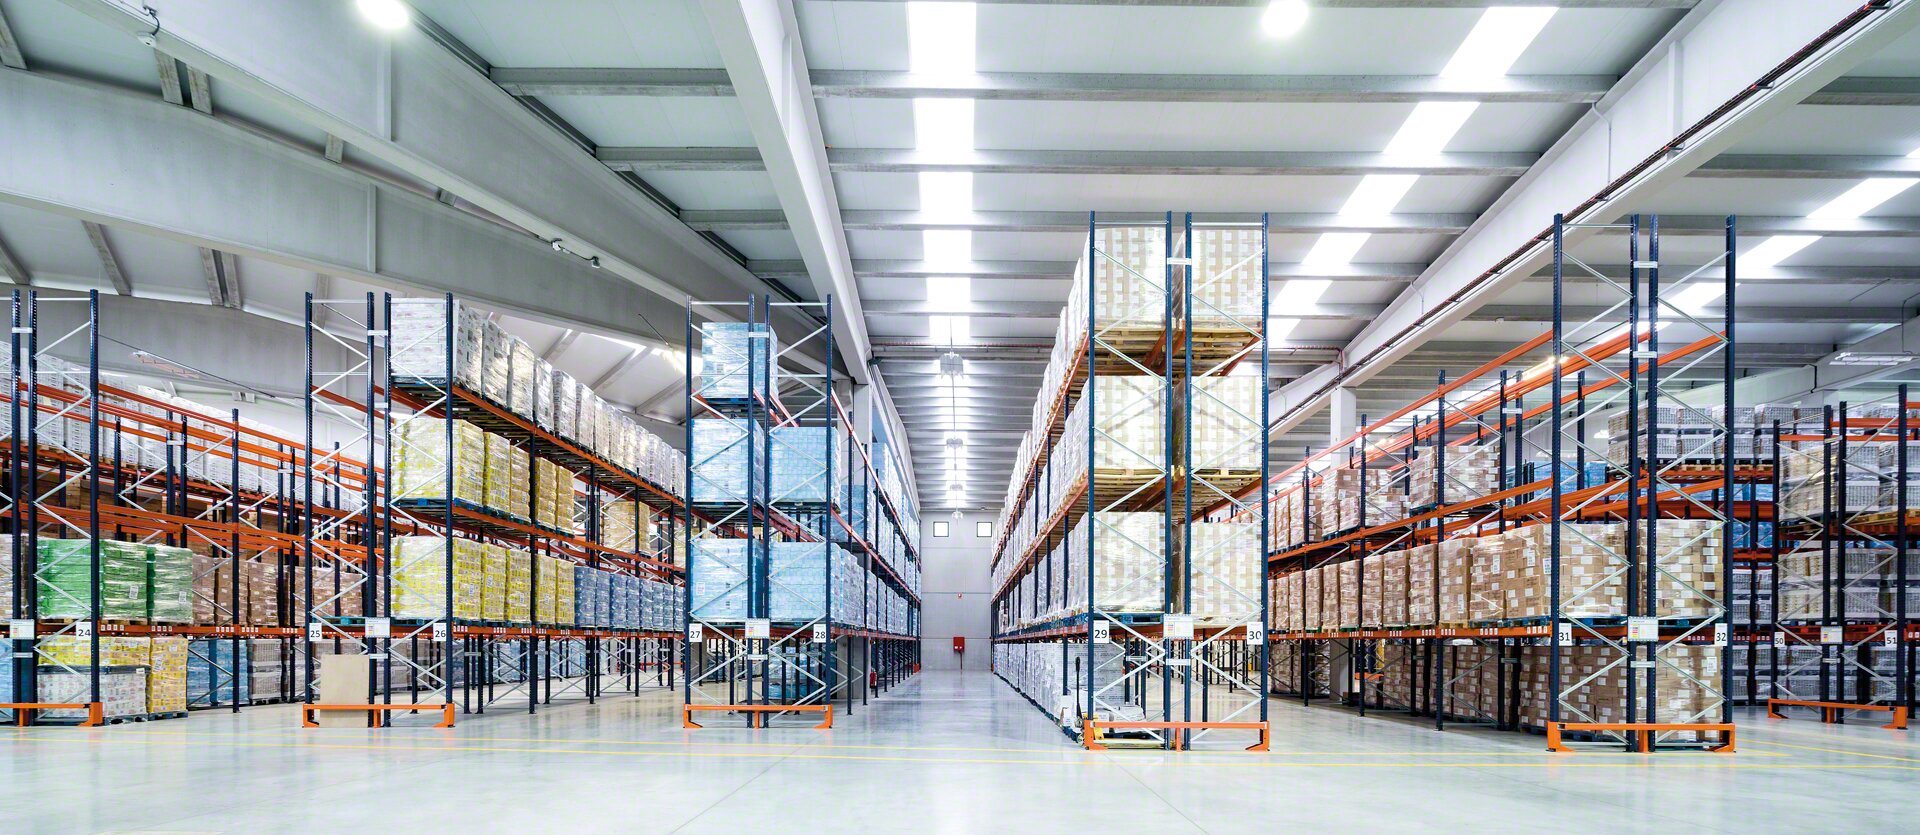 Low-bay warehouse with pallet storage racks